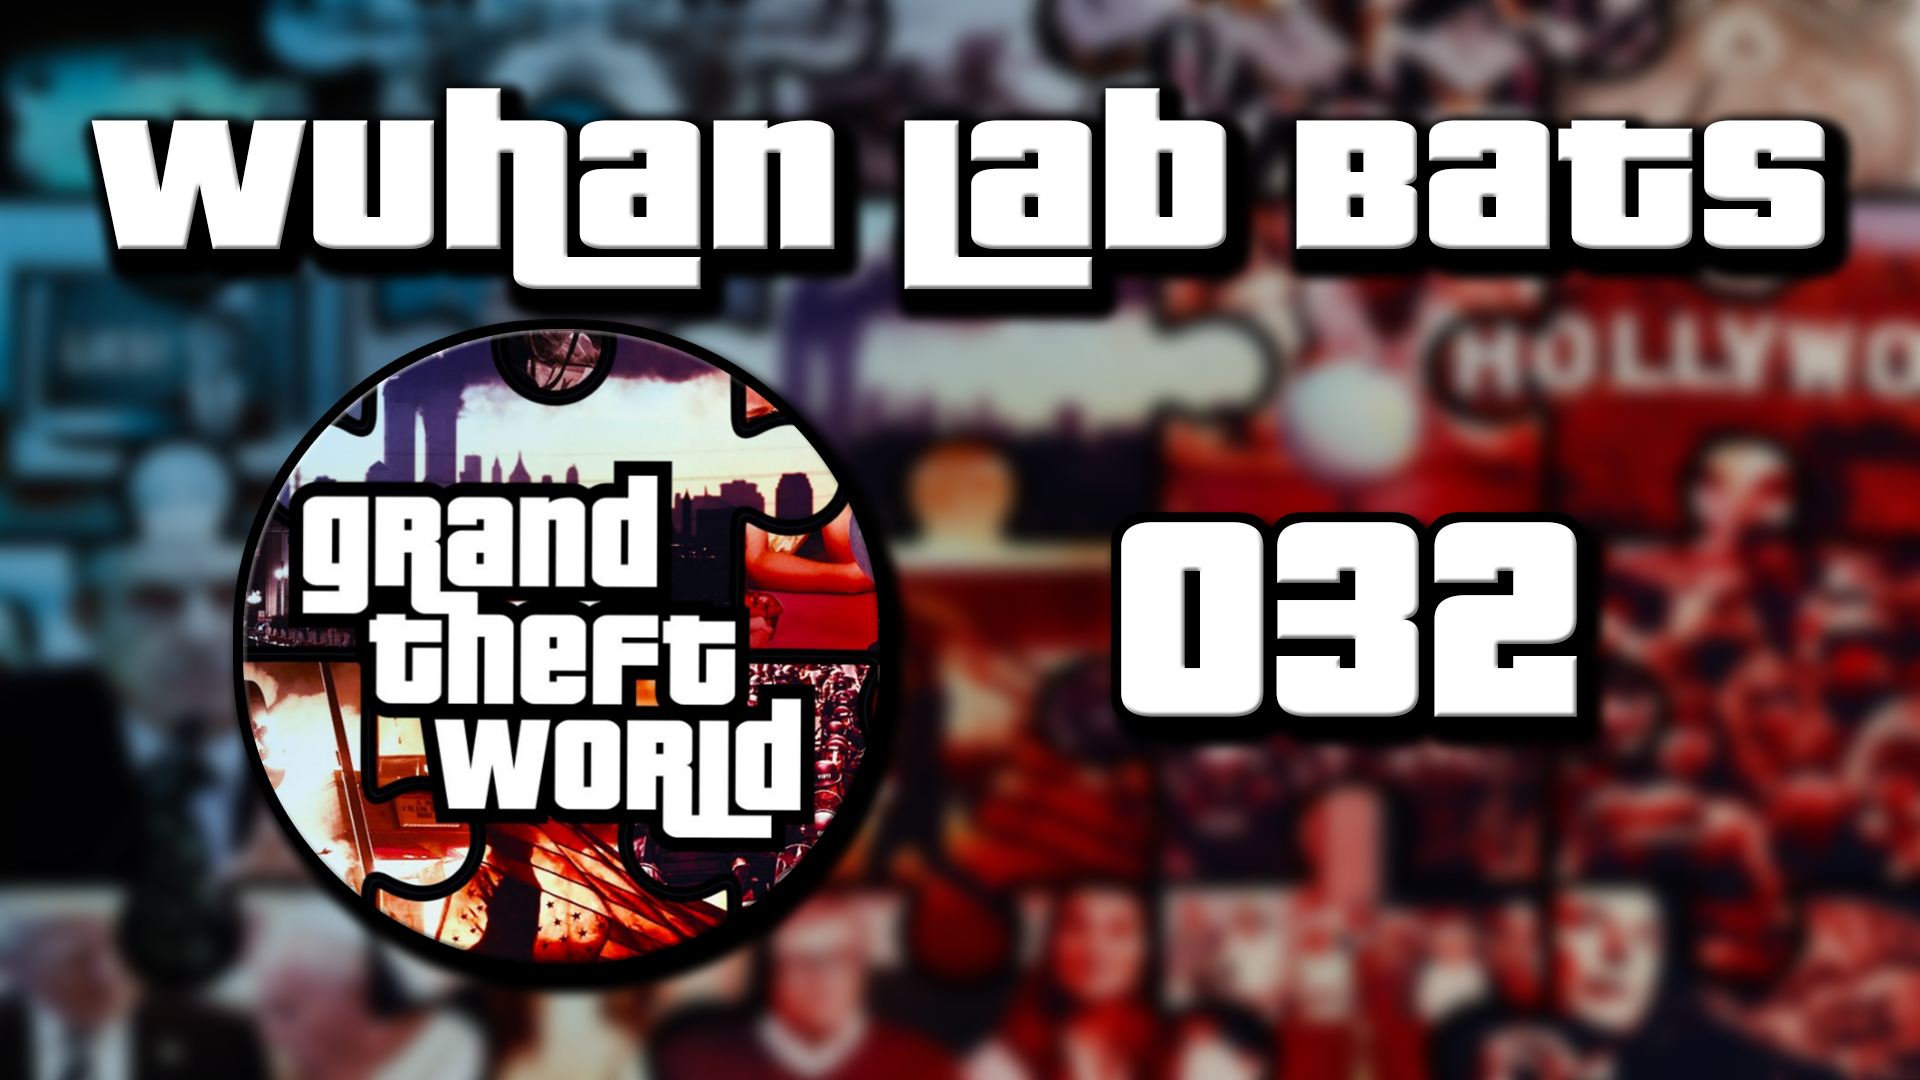 Grand Theft World Podcast 032 | Wuhan Lab Bats